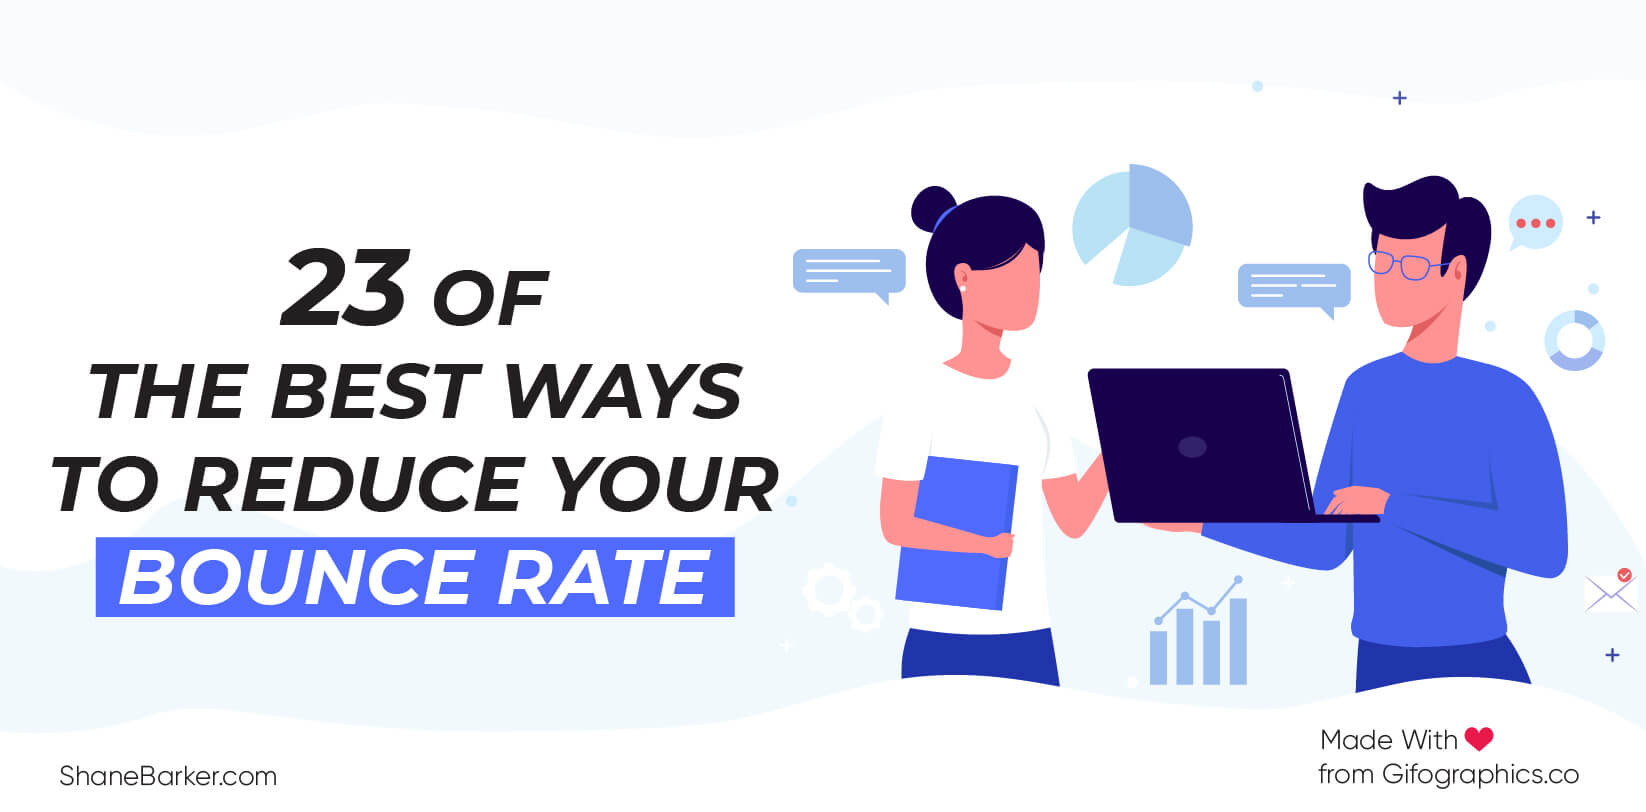 23 of the best ways to reduce your bounce rate